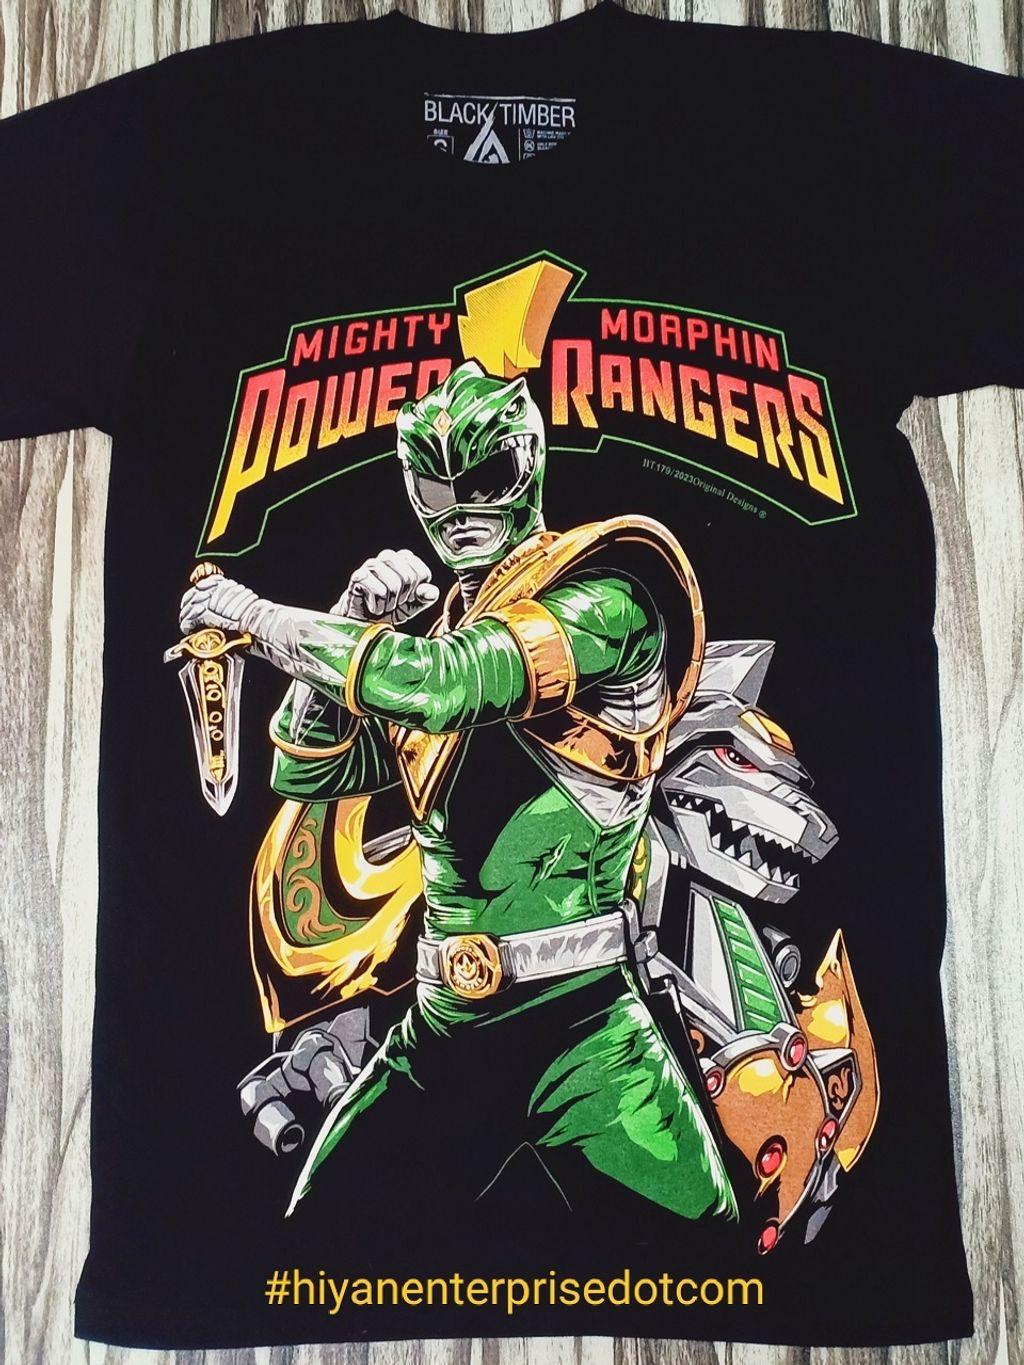 BT179 GREEN MIGHTY MORPHIN POWER RANGERS LIMITED COLLECTORS EDITION  ORIGINAL BLACK TIMBER COTTON T-SHIRT